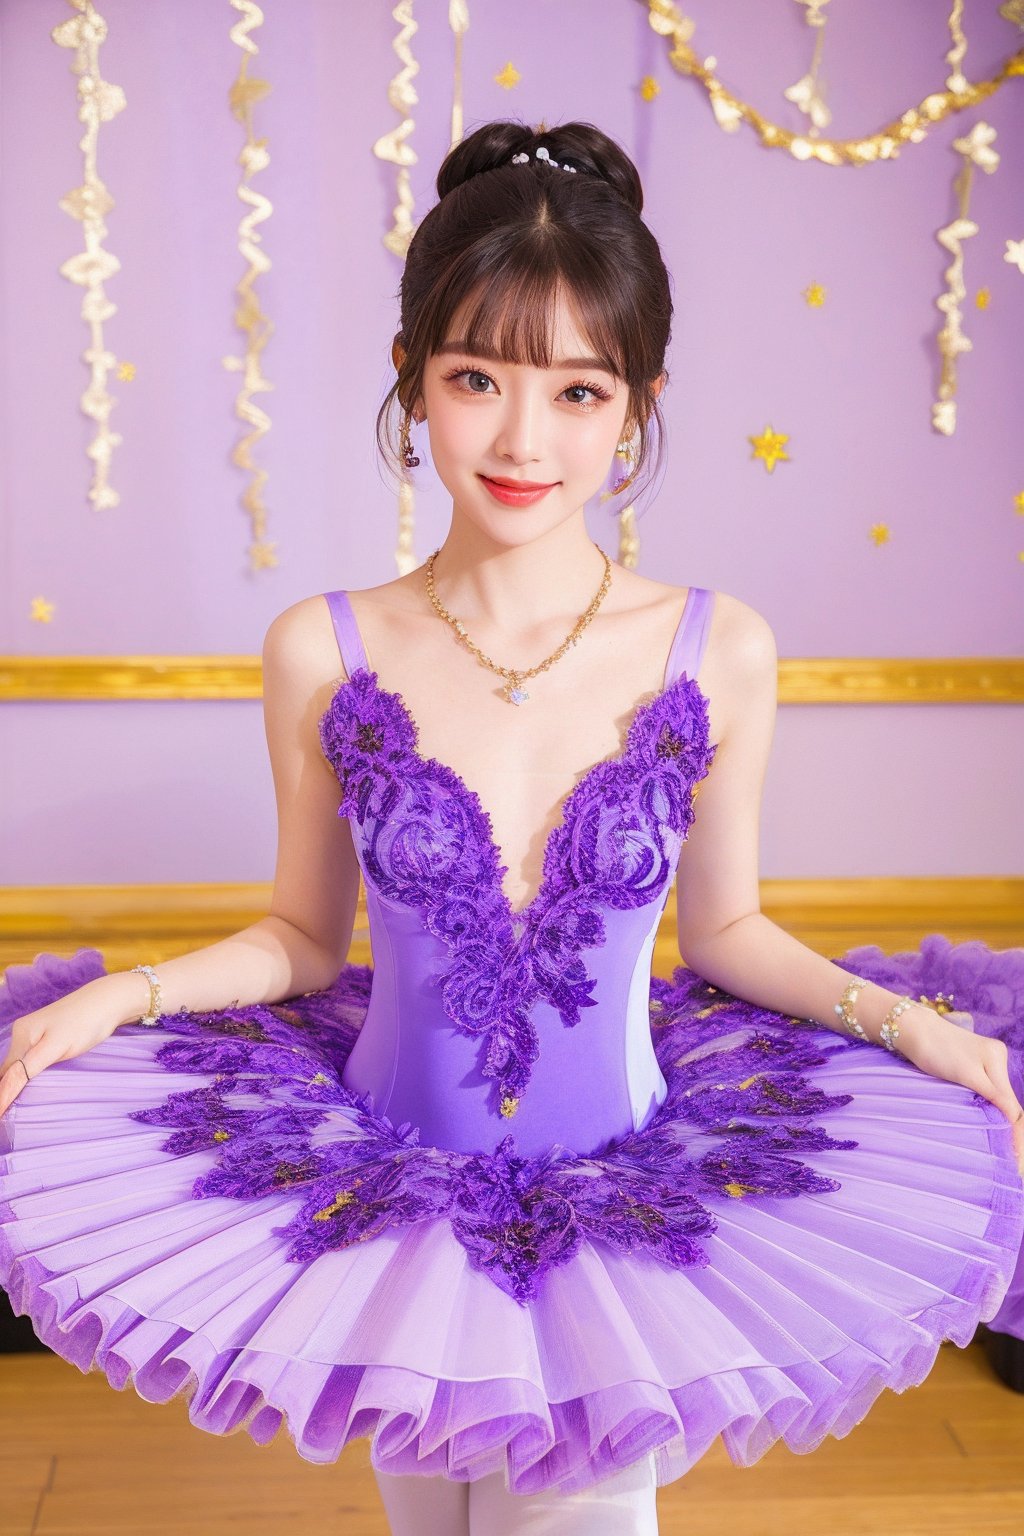 HDR,UHD,8K,best quality,masterpiece,Highly detailed,Studio lighting,ultra-fine painting,sharp focus,physically-based rendering,extreme detail description,Professional,masterpiece, best quality,delicate, beautiful,(1girl),(purple Ballet_tutu:1.5),(jewelry:1.5),lace,(looking_at_viewer:1.2), realistic,(blunt bangs:1.2),(hair bun),(standing:1),(hair ornament:1.2), (jewelry necklace:1),dance classroom background,(Half-length photo:1),(smile:1),(white lace stockings:1),